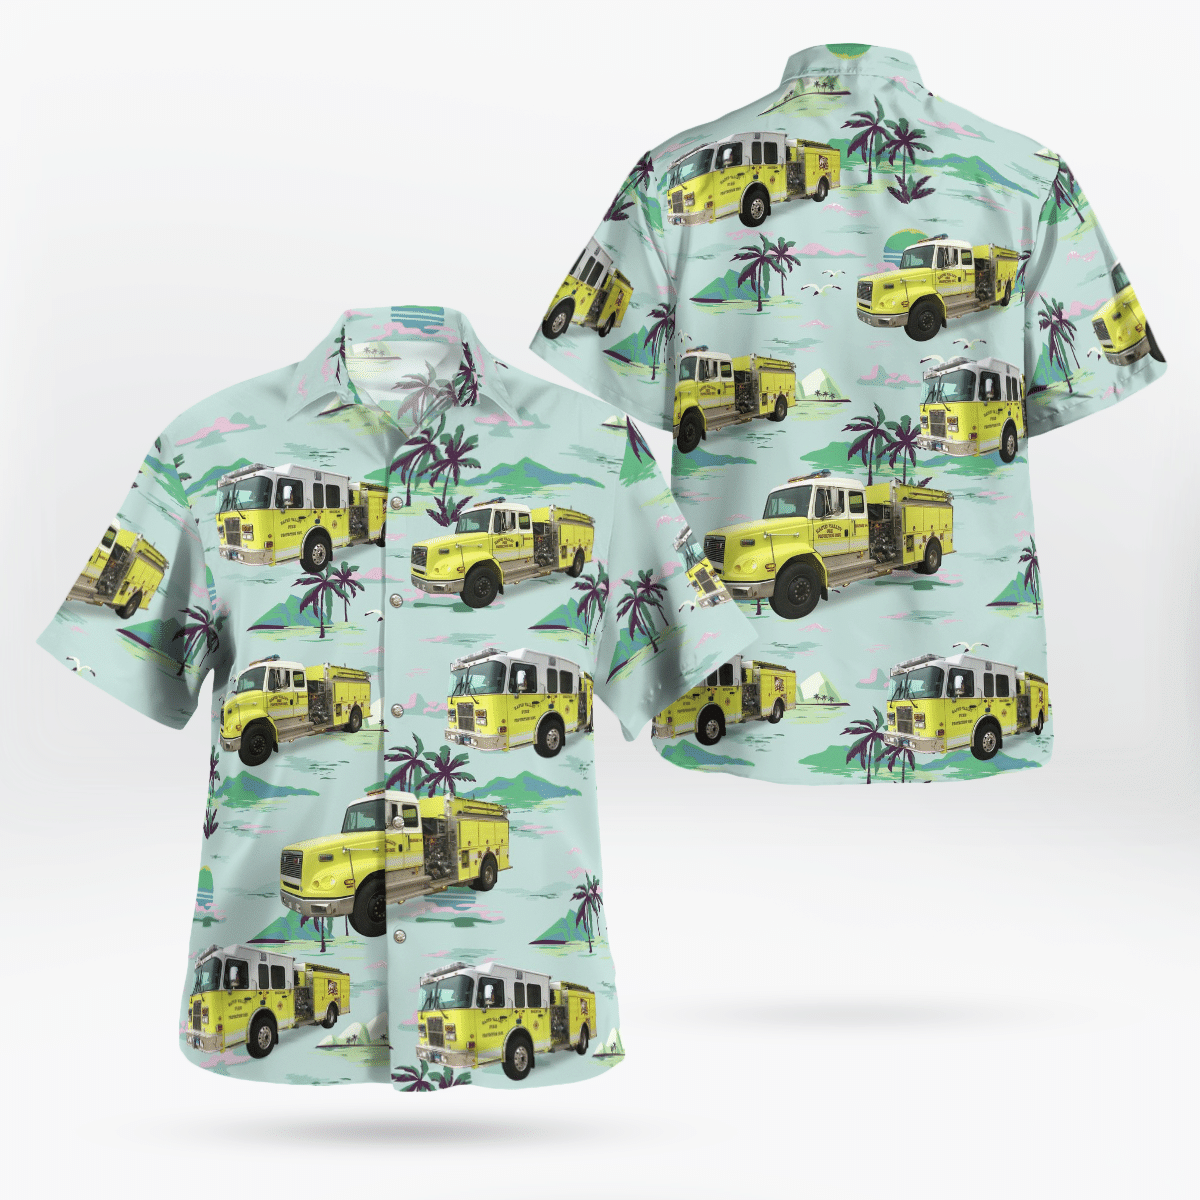 If you are in need of a new summertime look, pick up this Hawaiian shirt 90